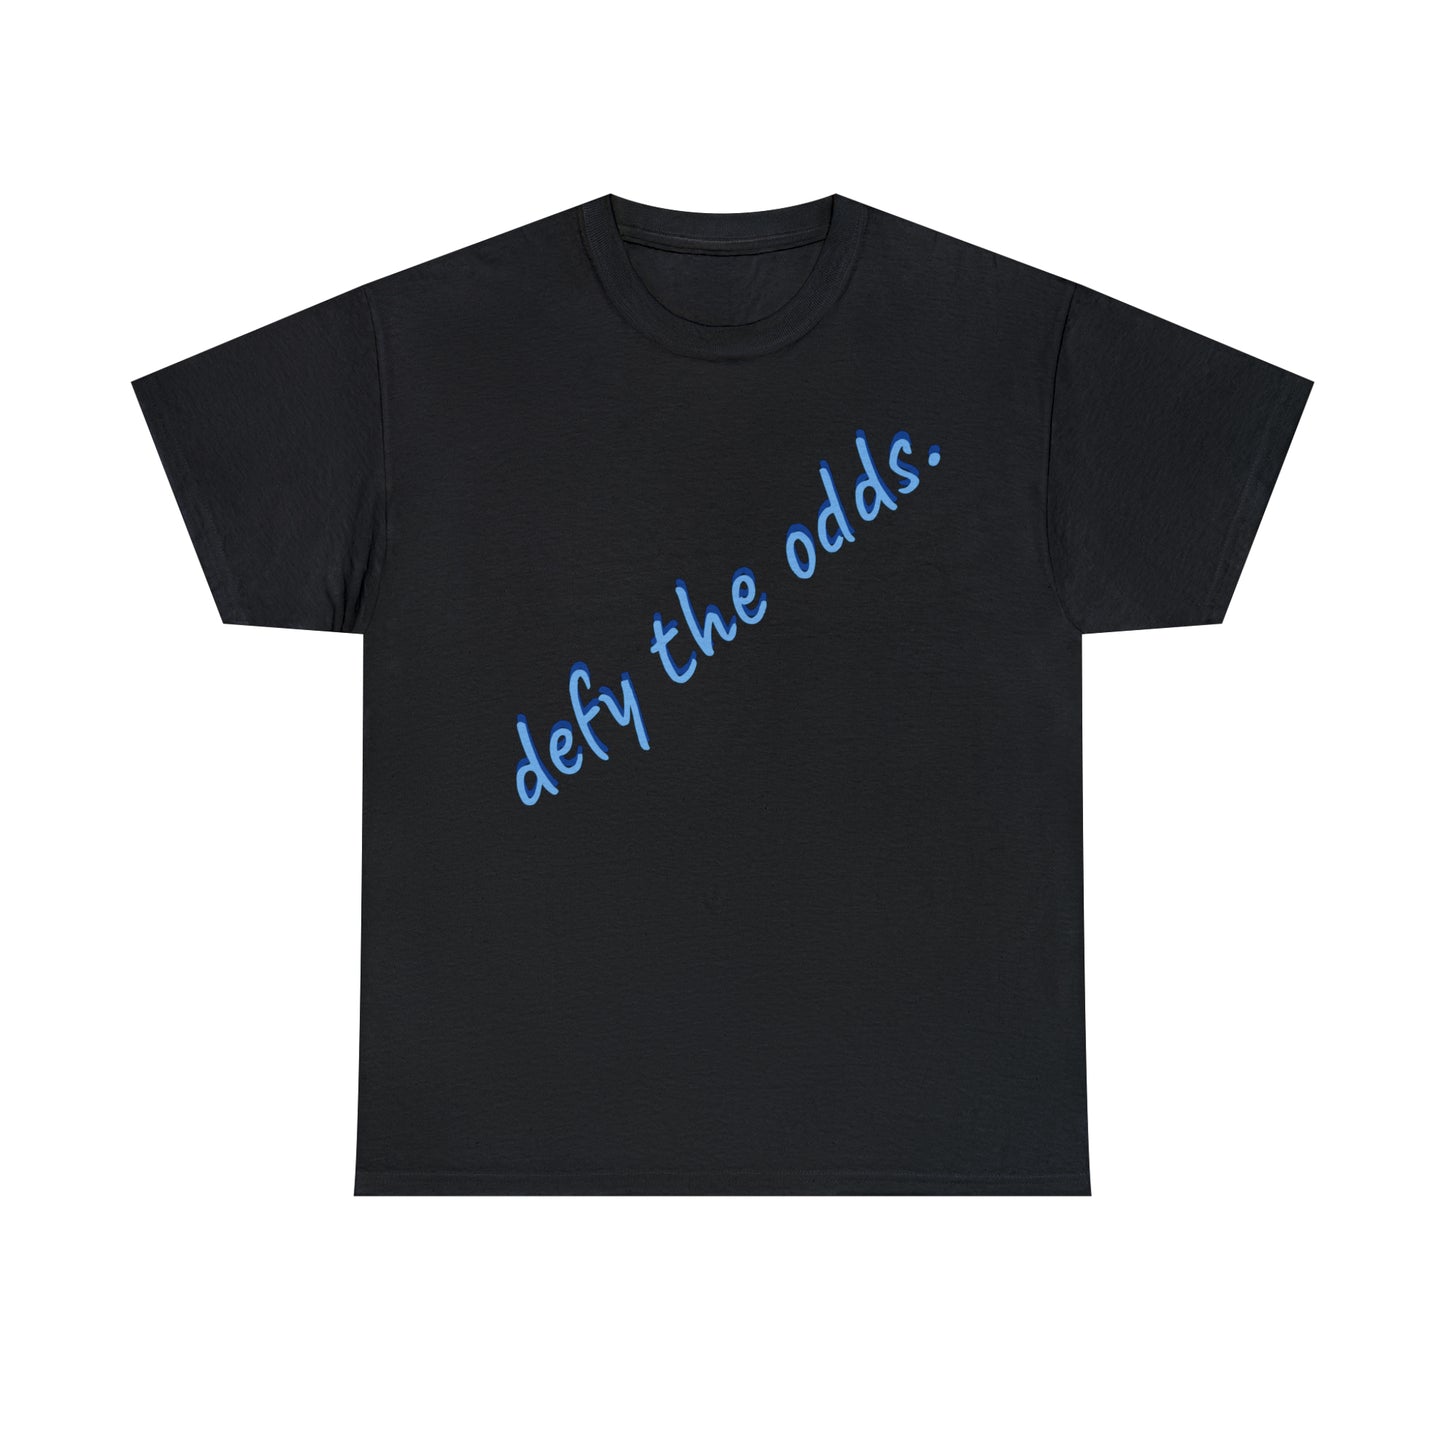 defy the odds "T"